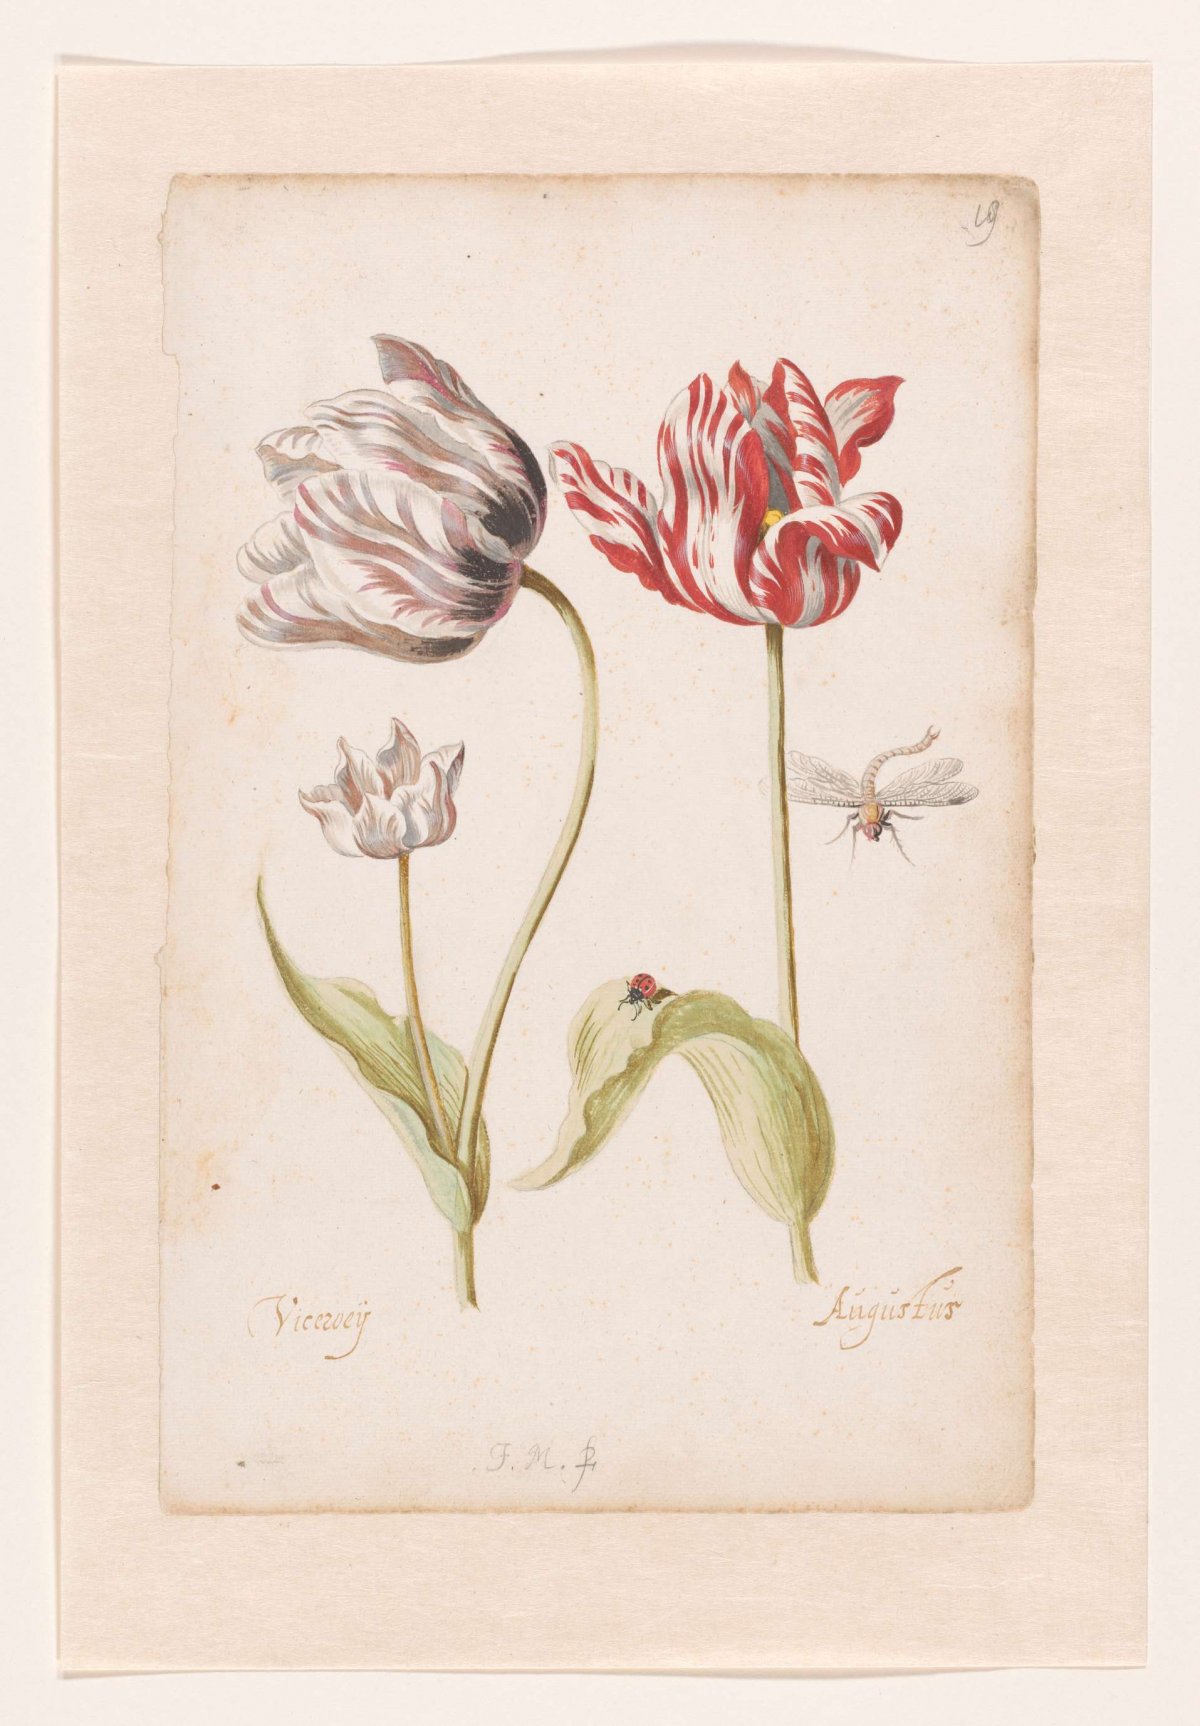 Two Tulips with Insects, Jacob Marrel, 1624 - 1681